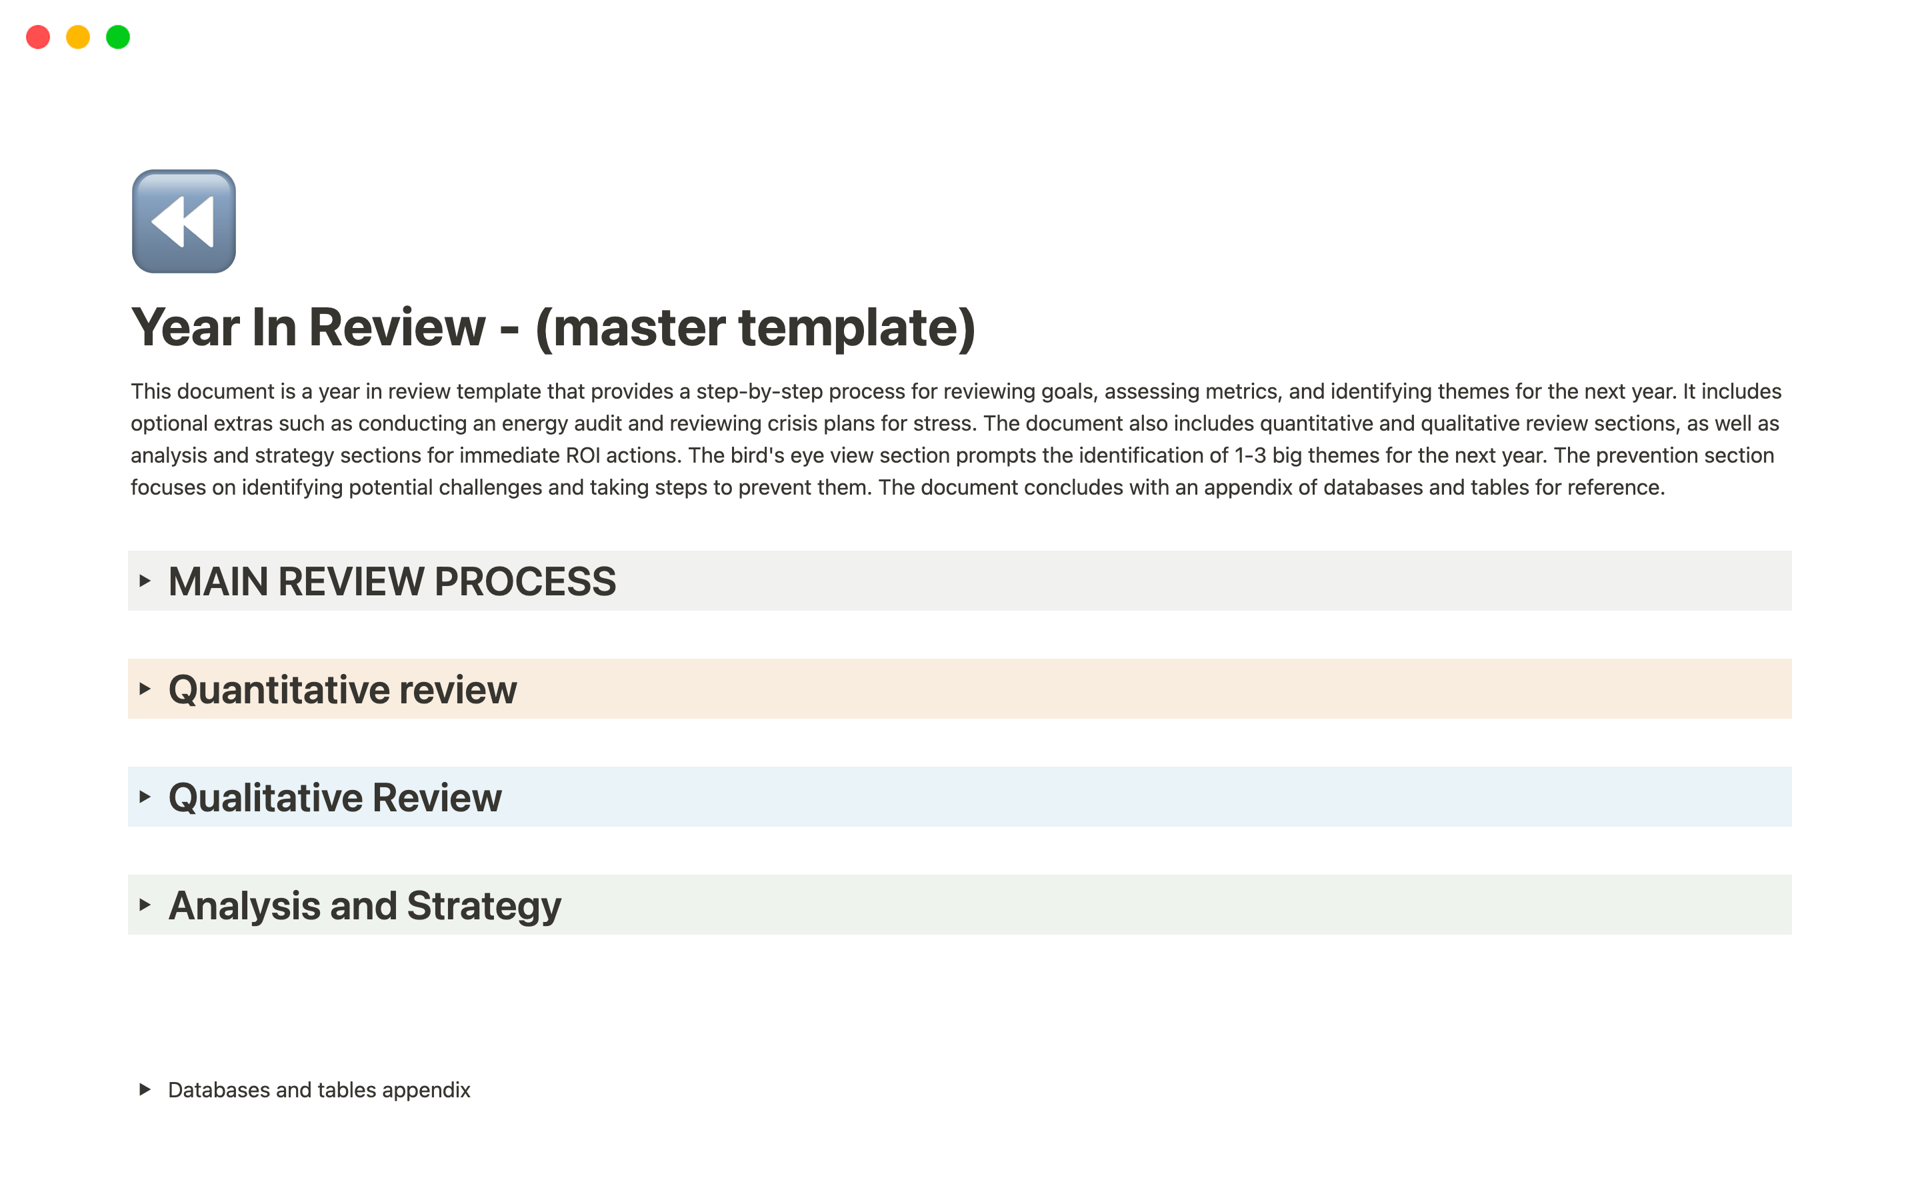 The exact yearly review master template our team at LGP uses to conduct our internal yearly reviews for each team member's own goals and personal growth. 